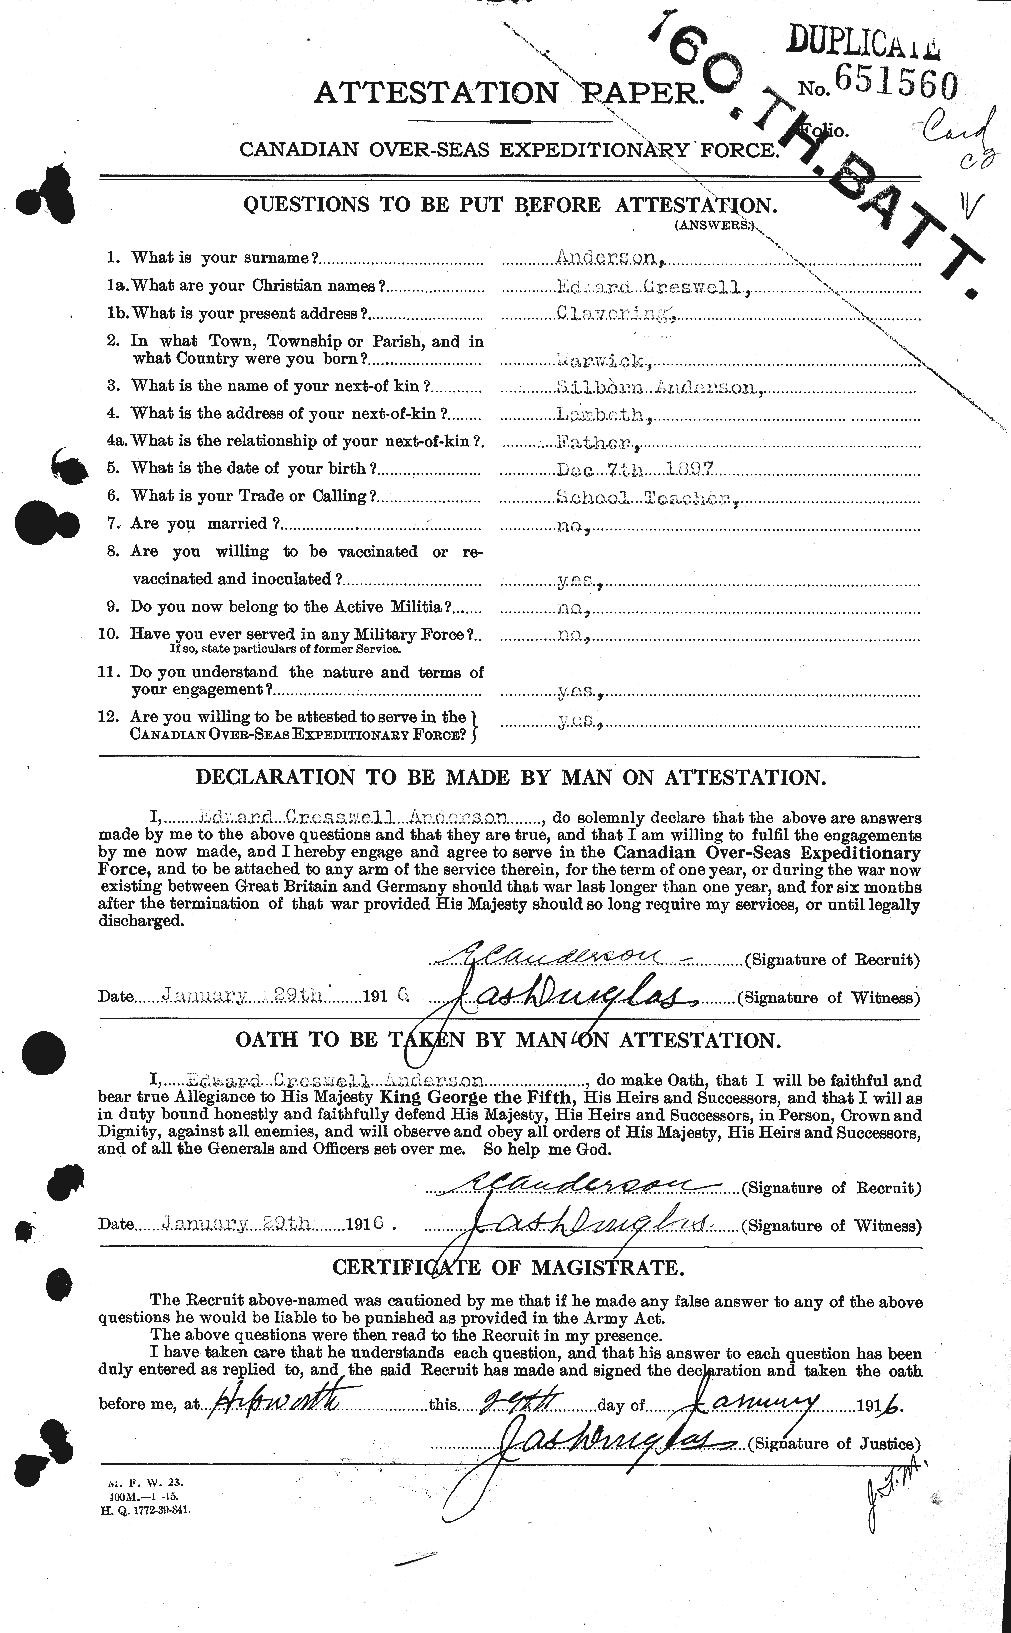 Personnel Records of the First World War - CEF 209939a